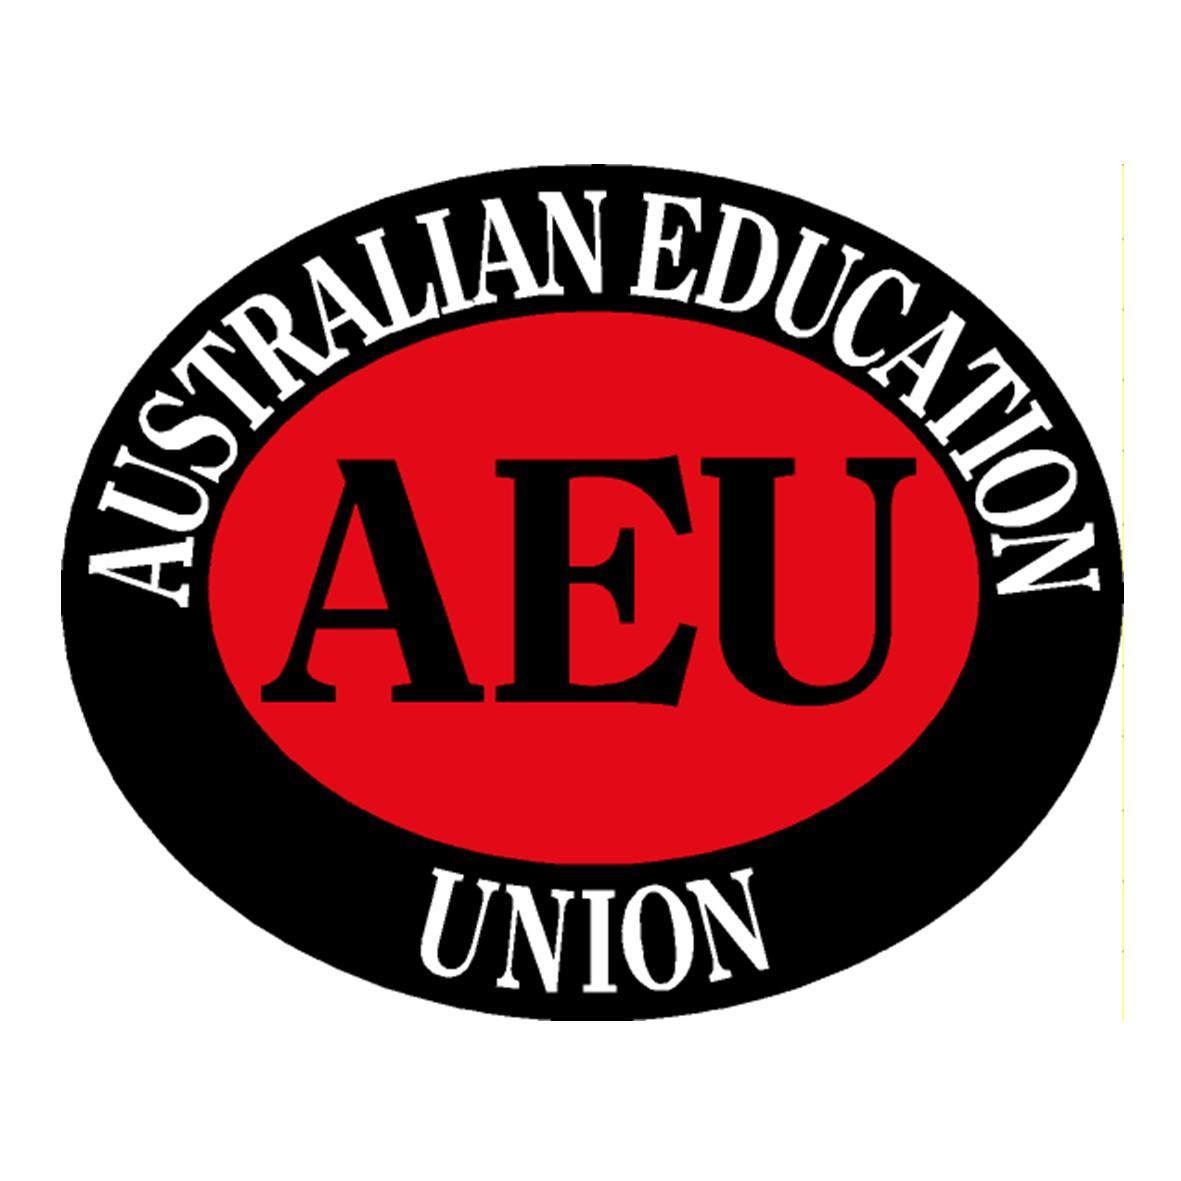 “TAFE has made a huge contribution to Australia’s economic prosperity, despite years of what can only be described as policy vandalism of the vocational education sector.' @CHaythorpeAEU #StopTAFECuts aeufederal.org.au/news-media/med…